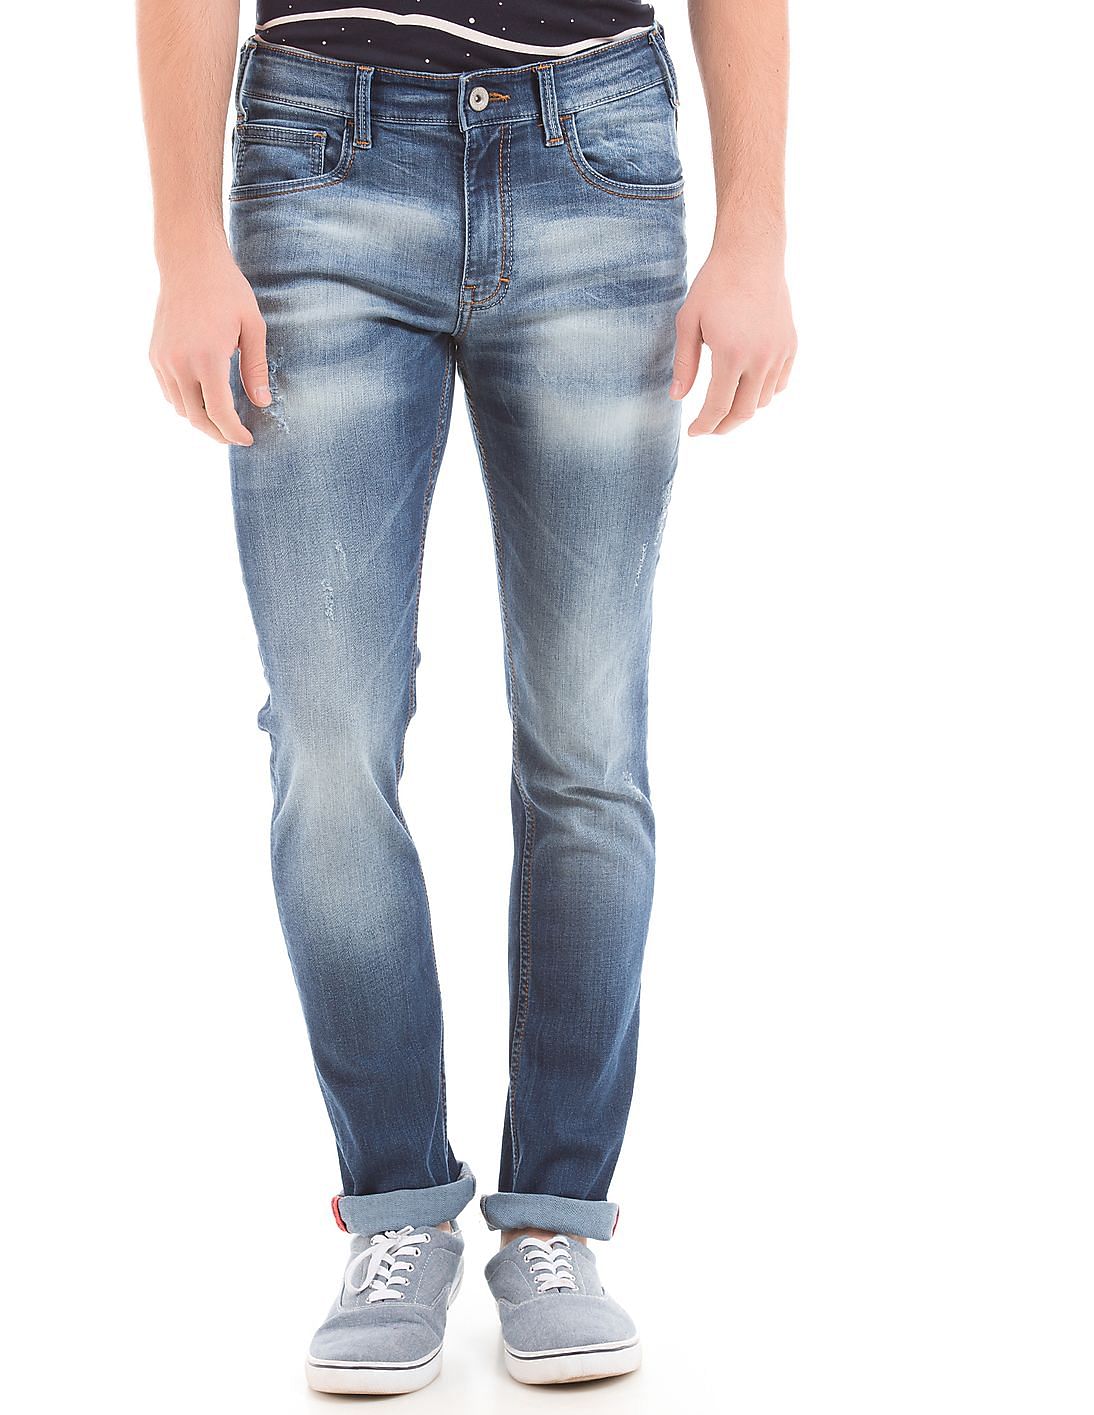 Flat 70% Off on Men's Jeans, Starts @ Rs.780